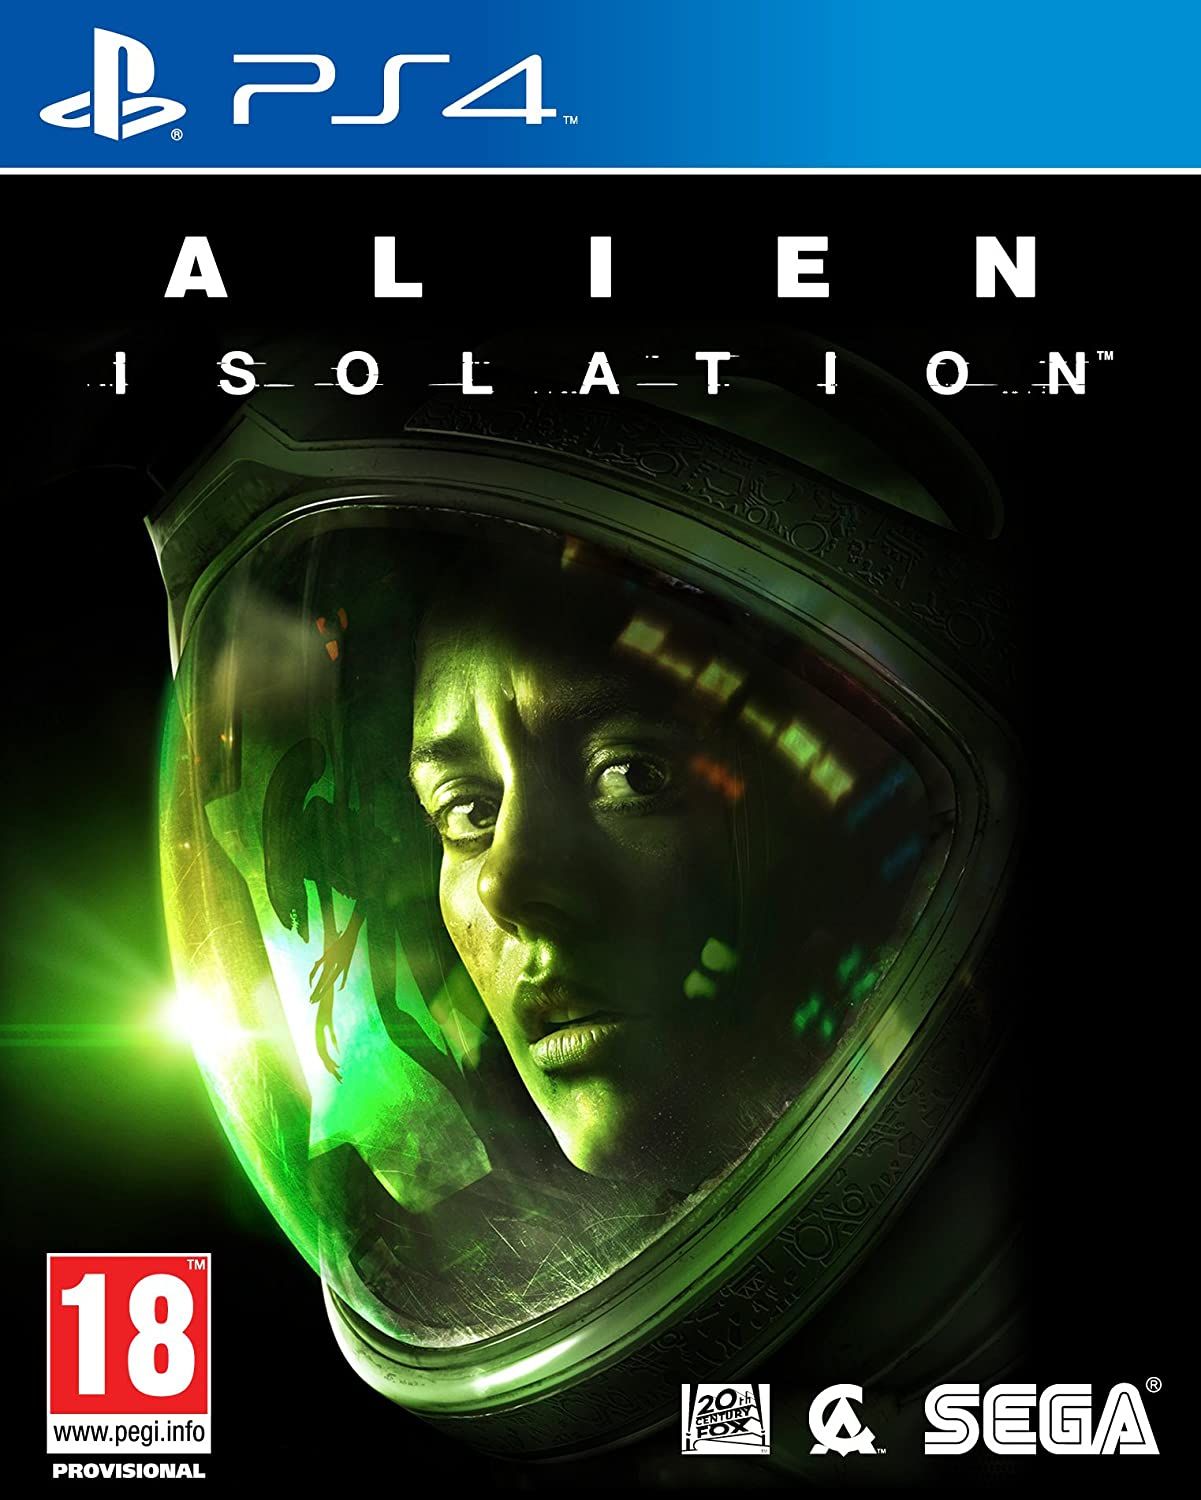 A Xenomorph in the reflection of a terrified astronaut's helmet on the cover case for Alien Isolation